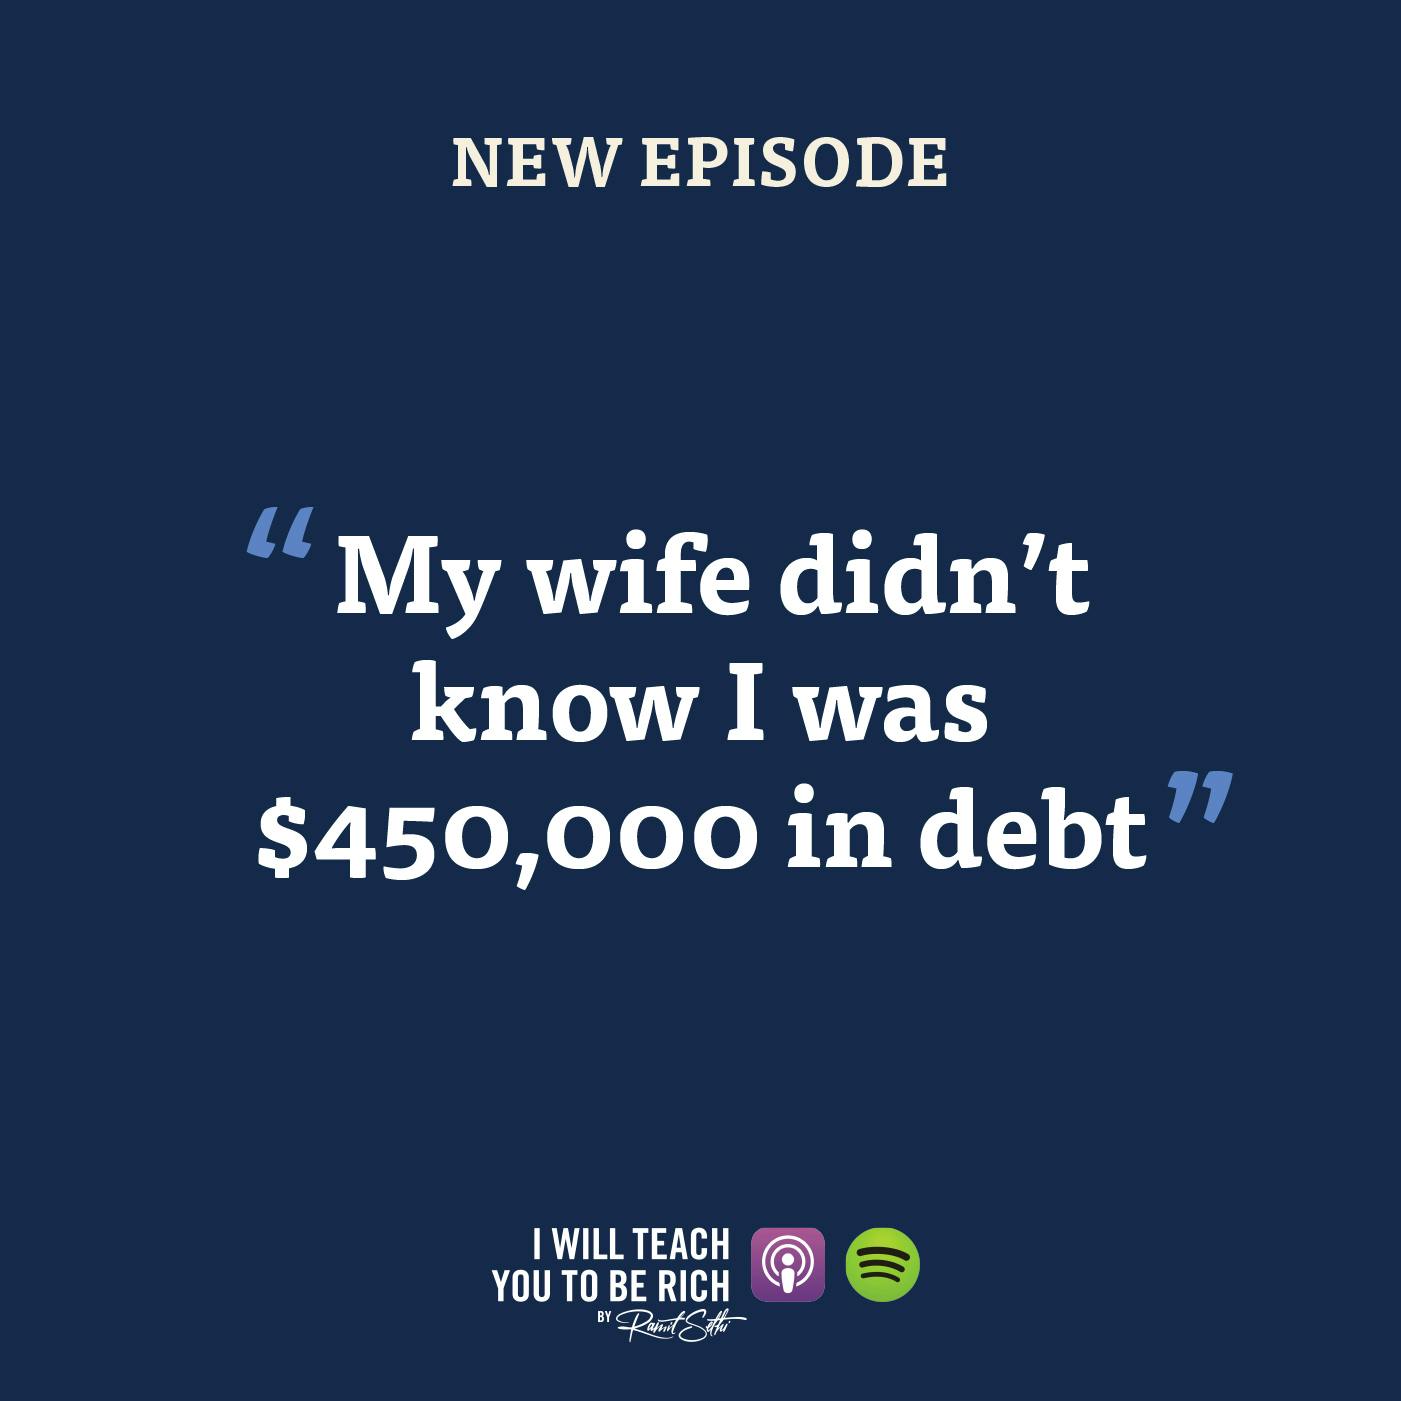 4. “My wife didn’t know I had $450,000 of debt until yesterday”